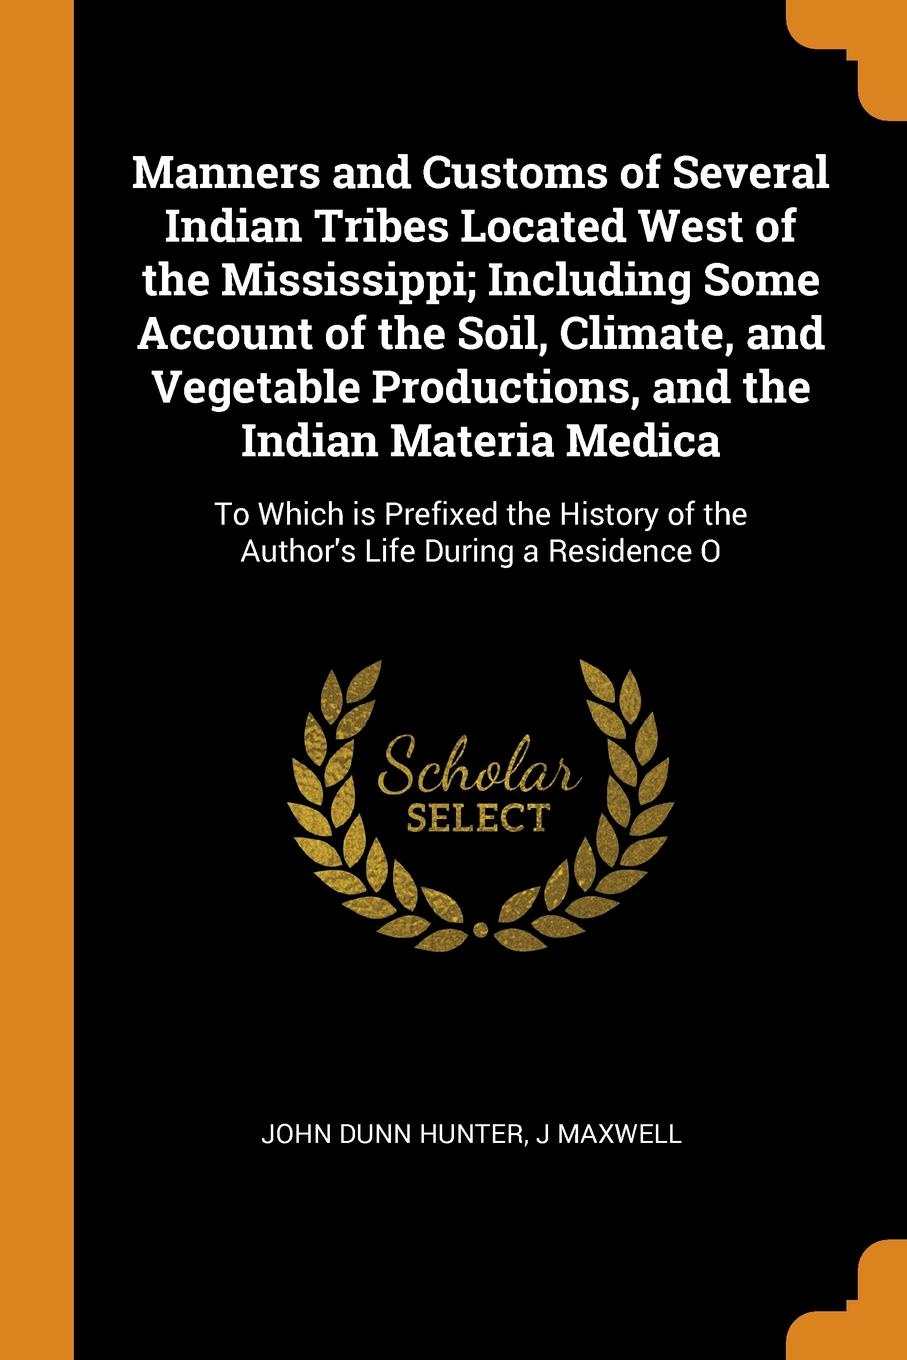 Manners and Customs of Several Indian Tribes Located West of the Mississippi; Including Some Account of the Soil, Climate, and Vegetable Productions, and the Indian Materia Medica. To Which is Prefixed the History of the Author`s Life During a Res...